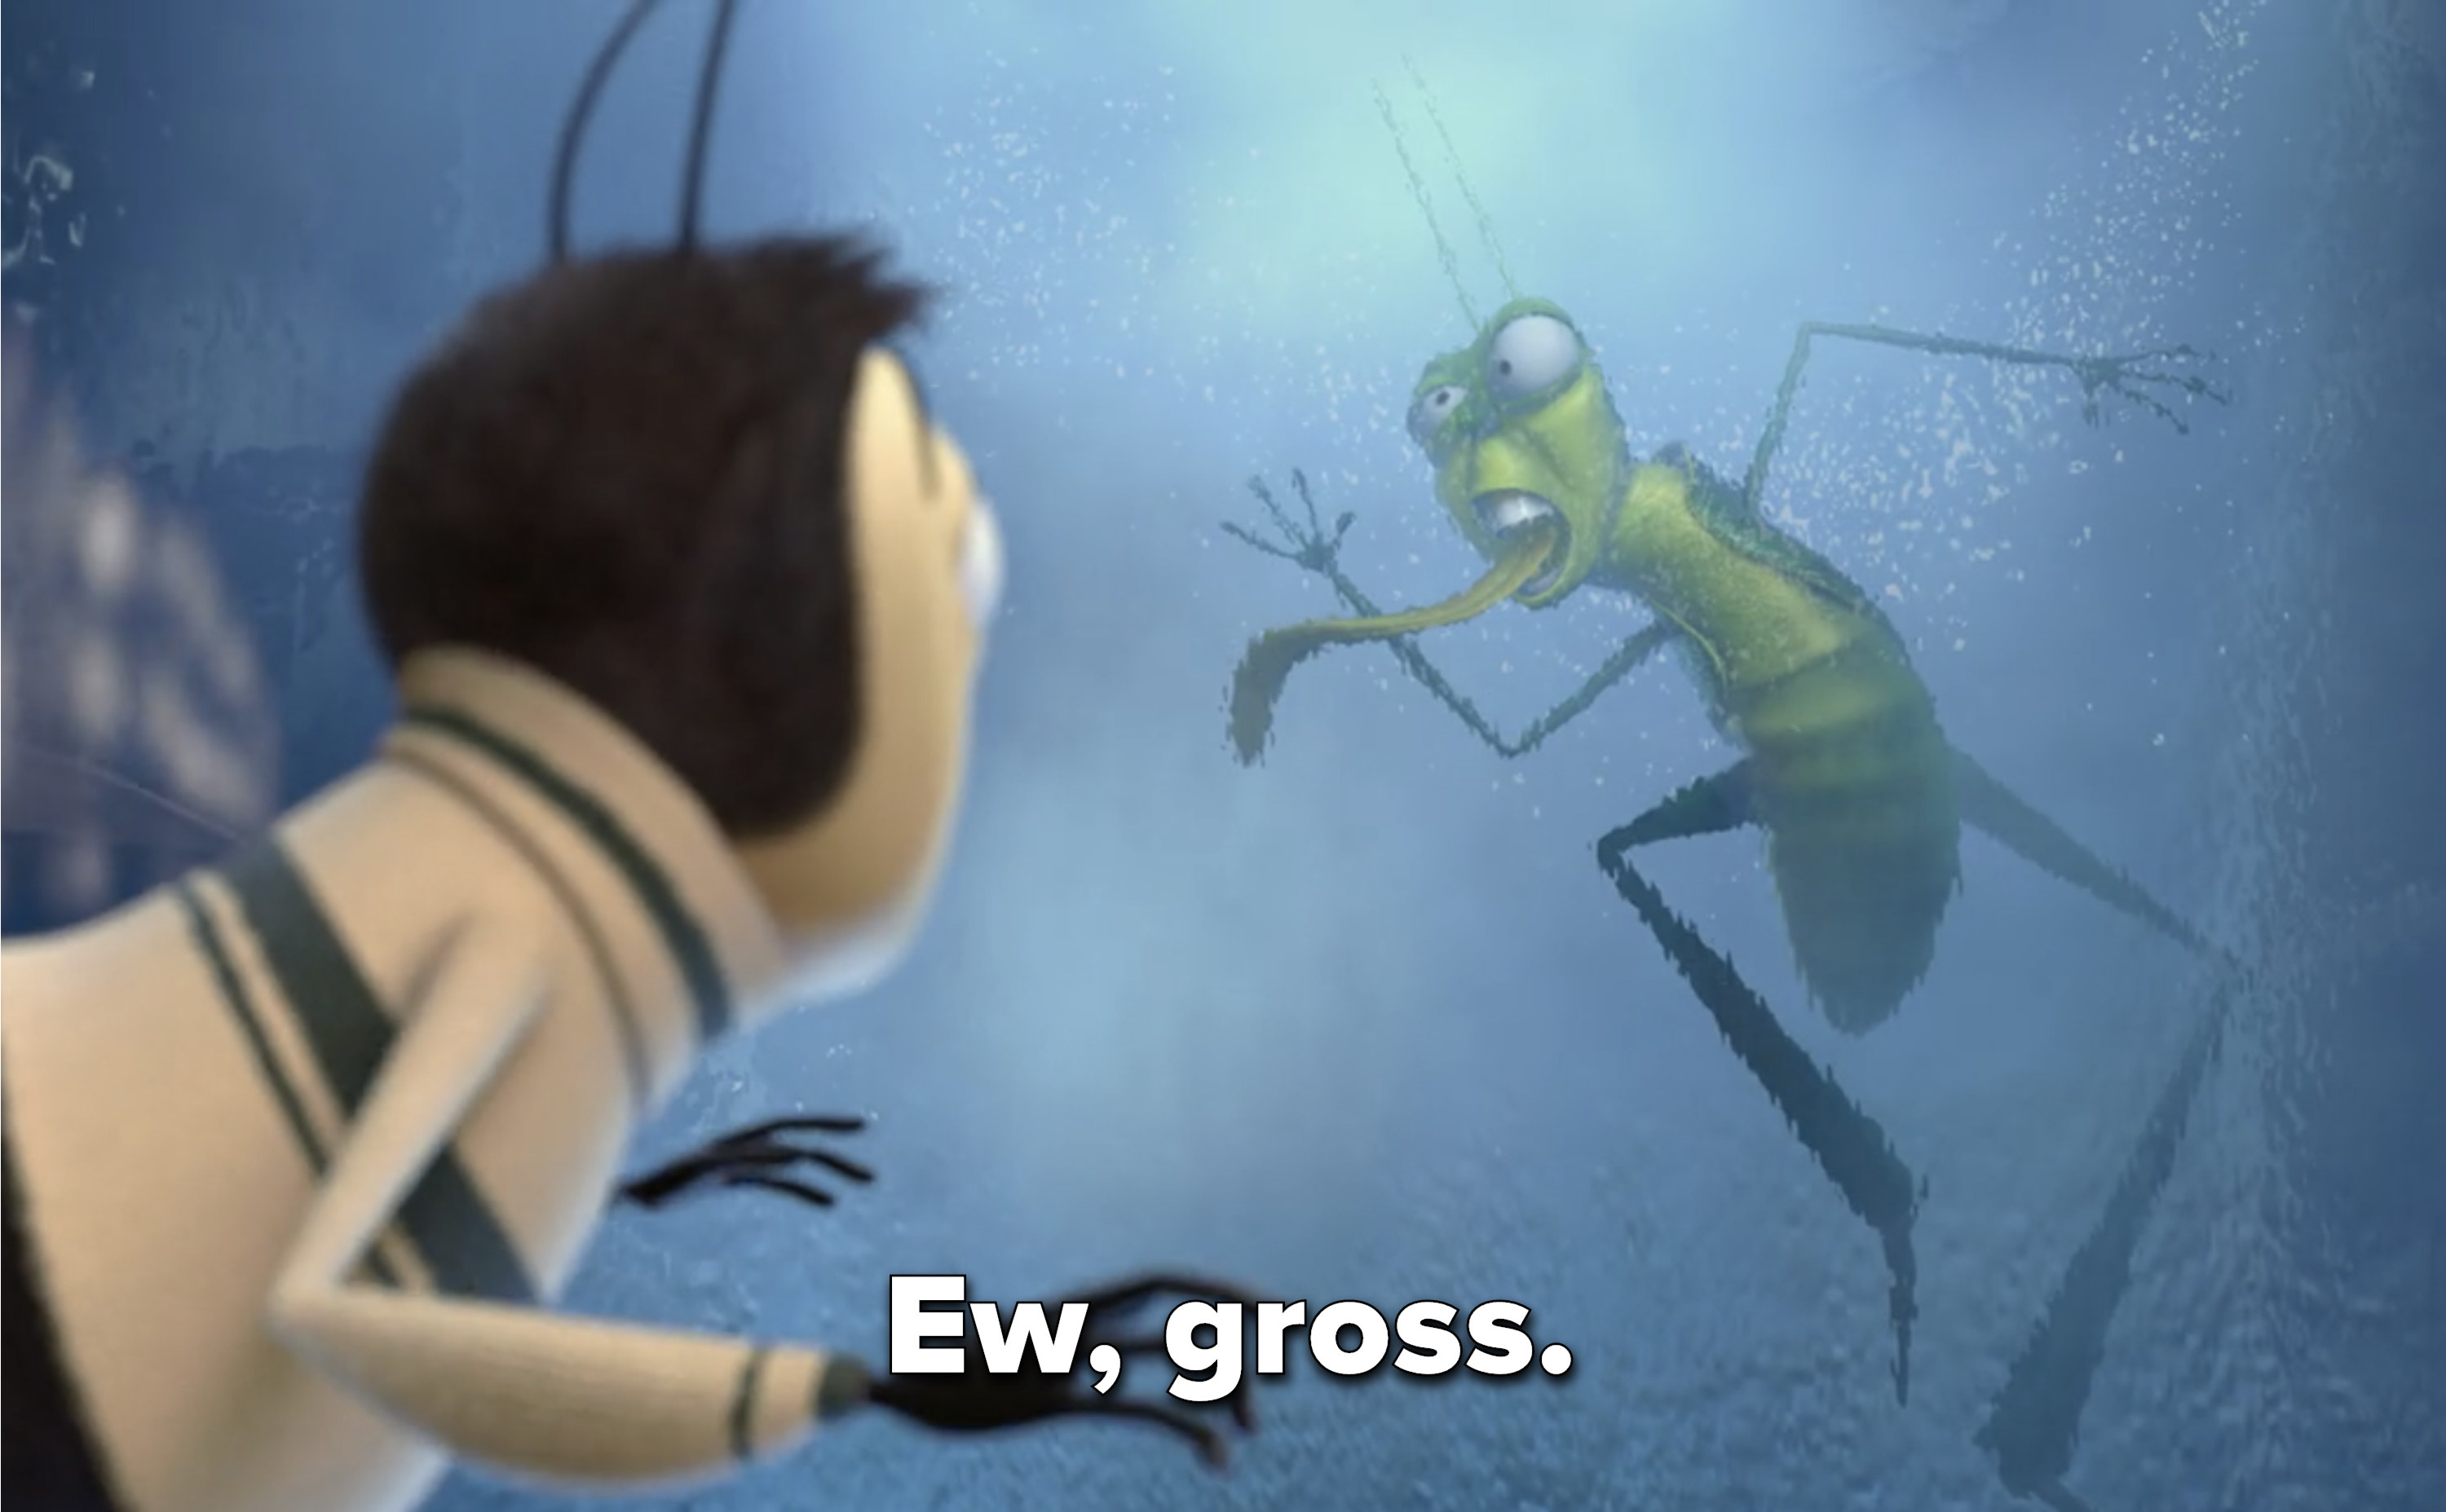 Barry sees a frozen solid bug and says &quot;Ew, gross&quot;